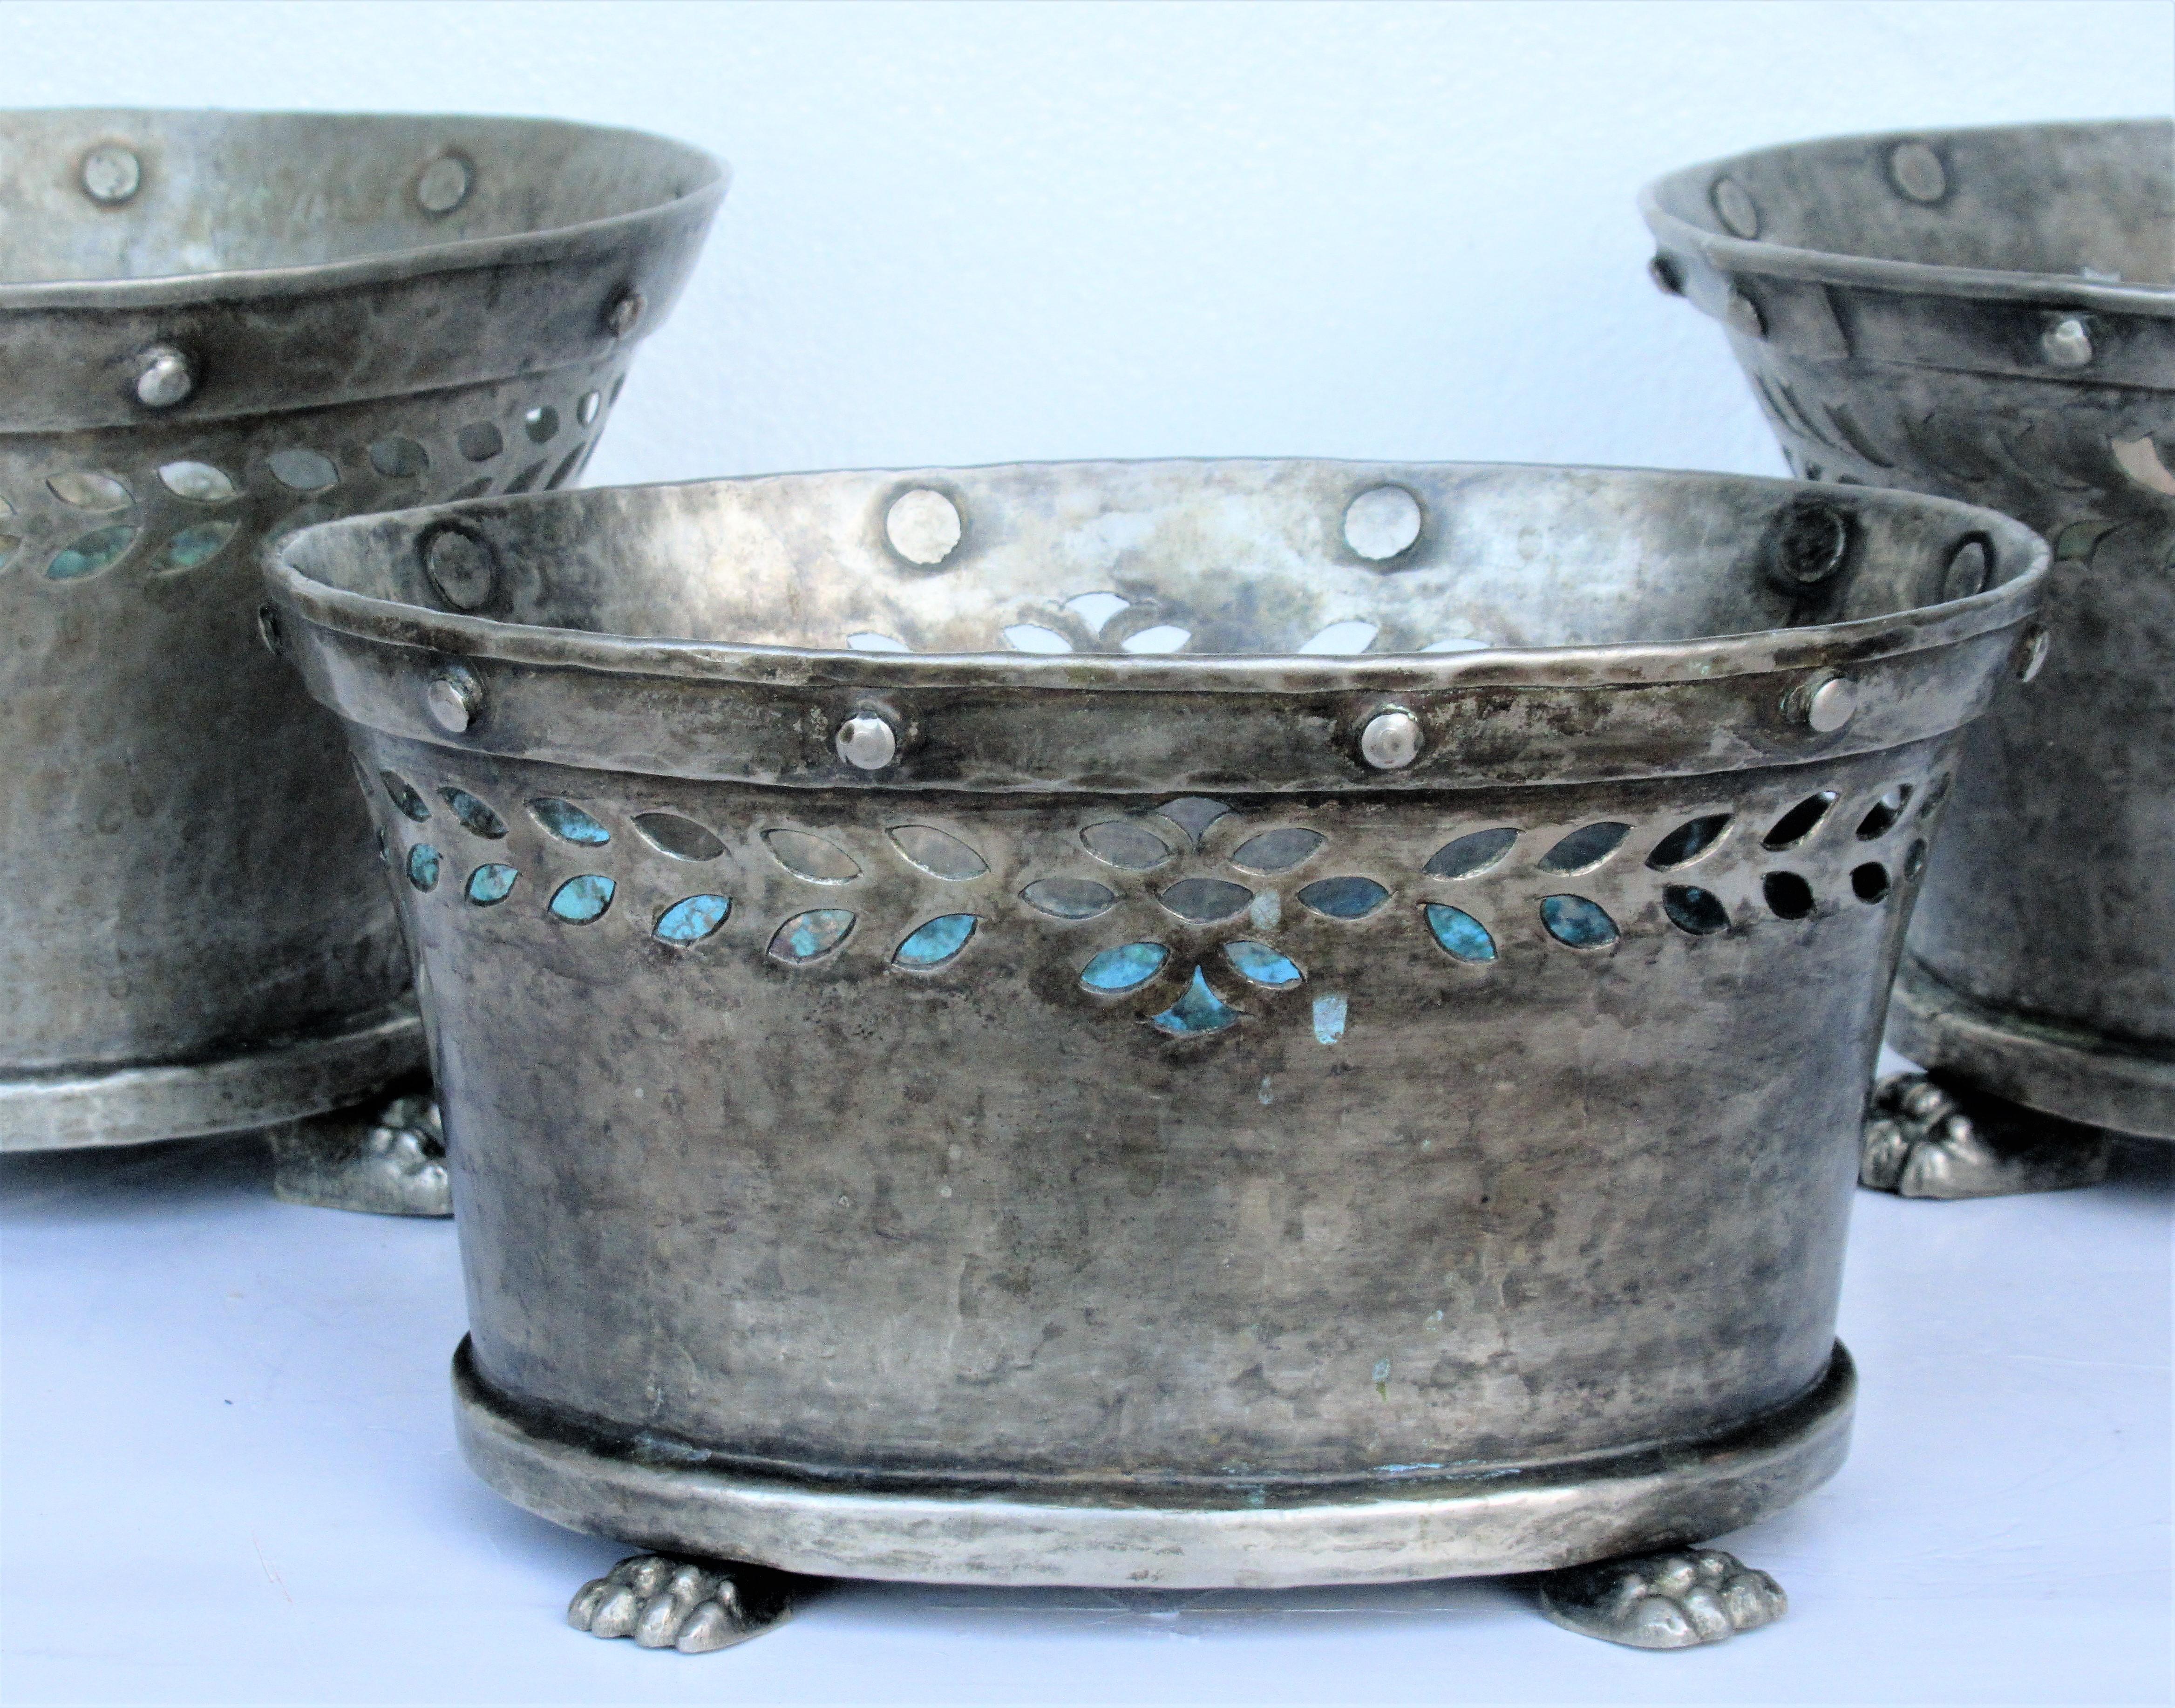 A group of three silver tinned bronze tabletop cachepot planters. The two flared round shaped ones are a near pair with the exception of different shaped cutouts along upper portion of bowl and one being very slightly larger. The other cachepot is